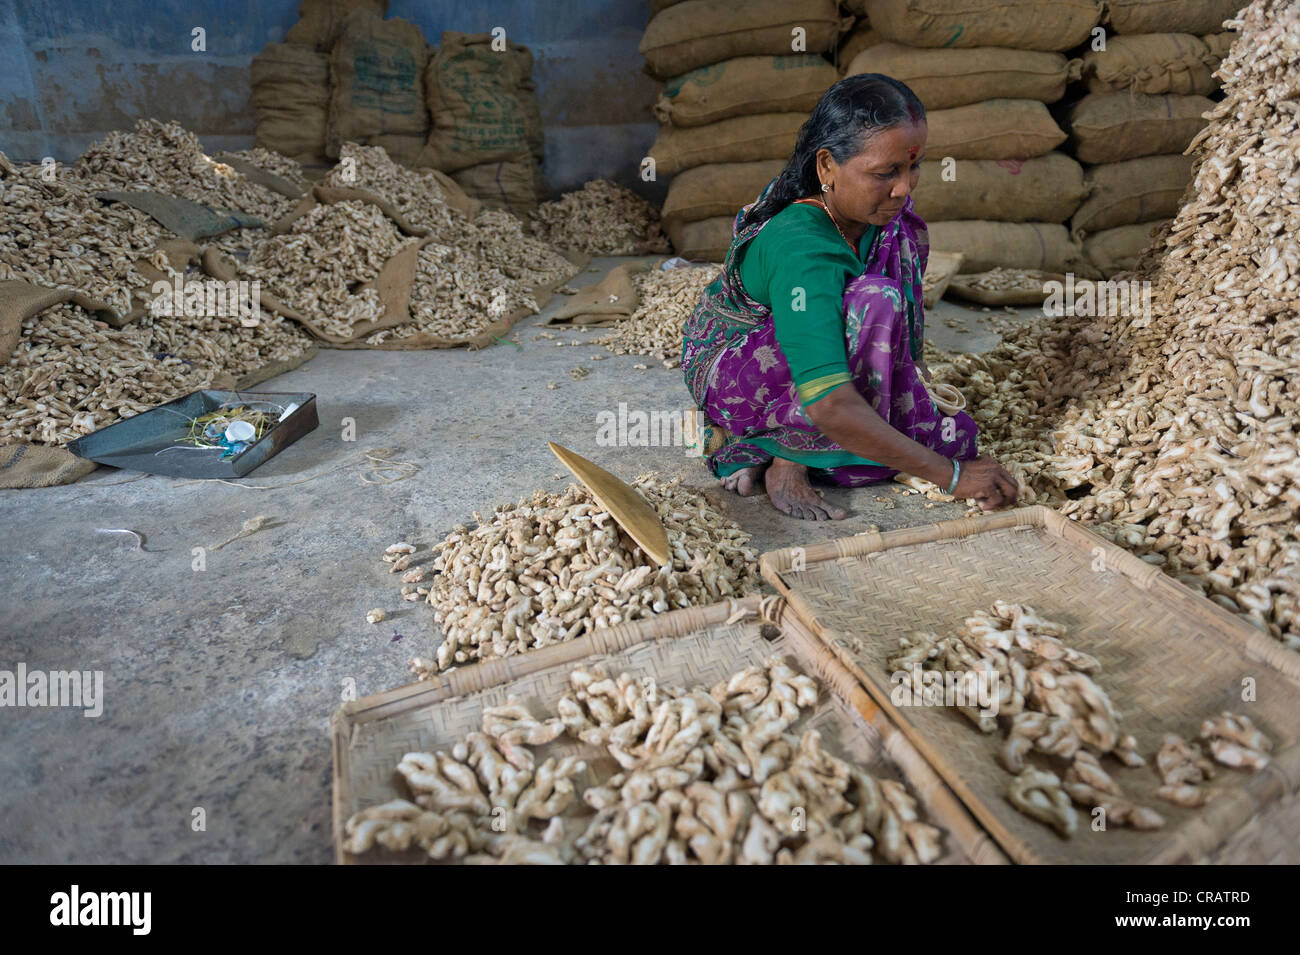 Women working in a spice storehouse, ginger and bags of ginger, Jew Town, Kochi, Kerala, southern India, India, Asia Stock Photo